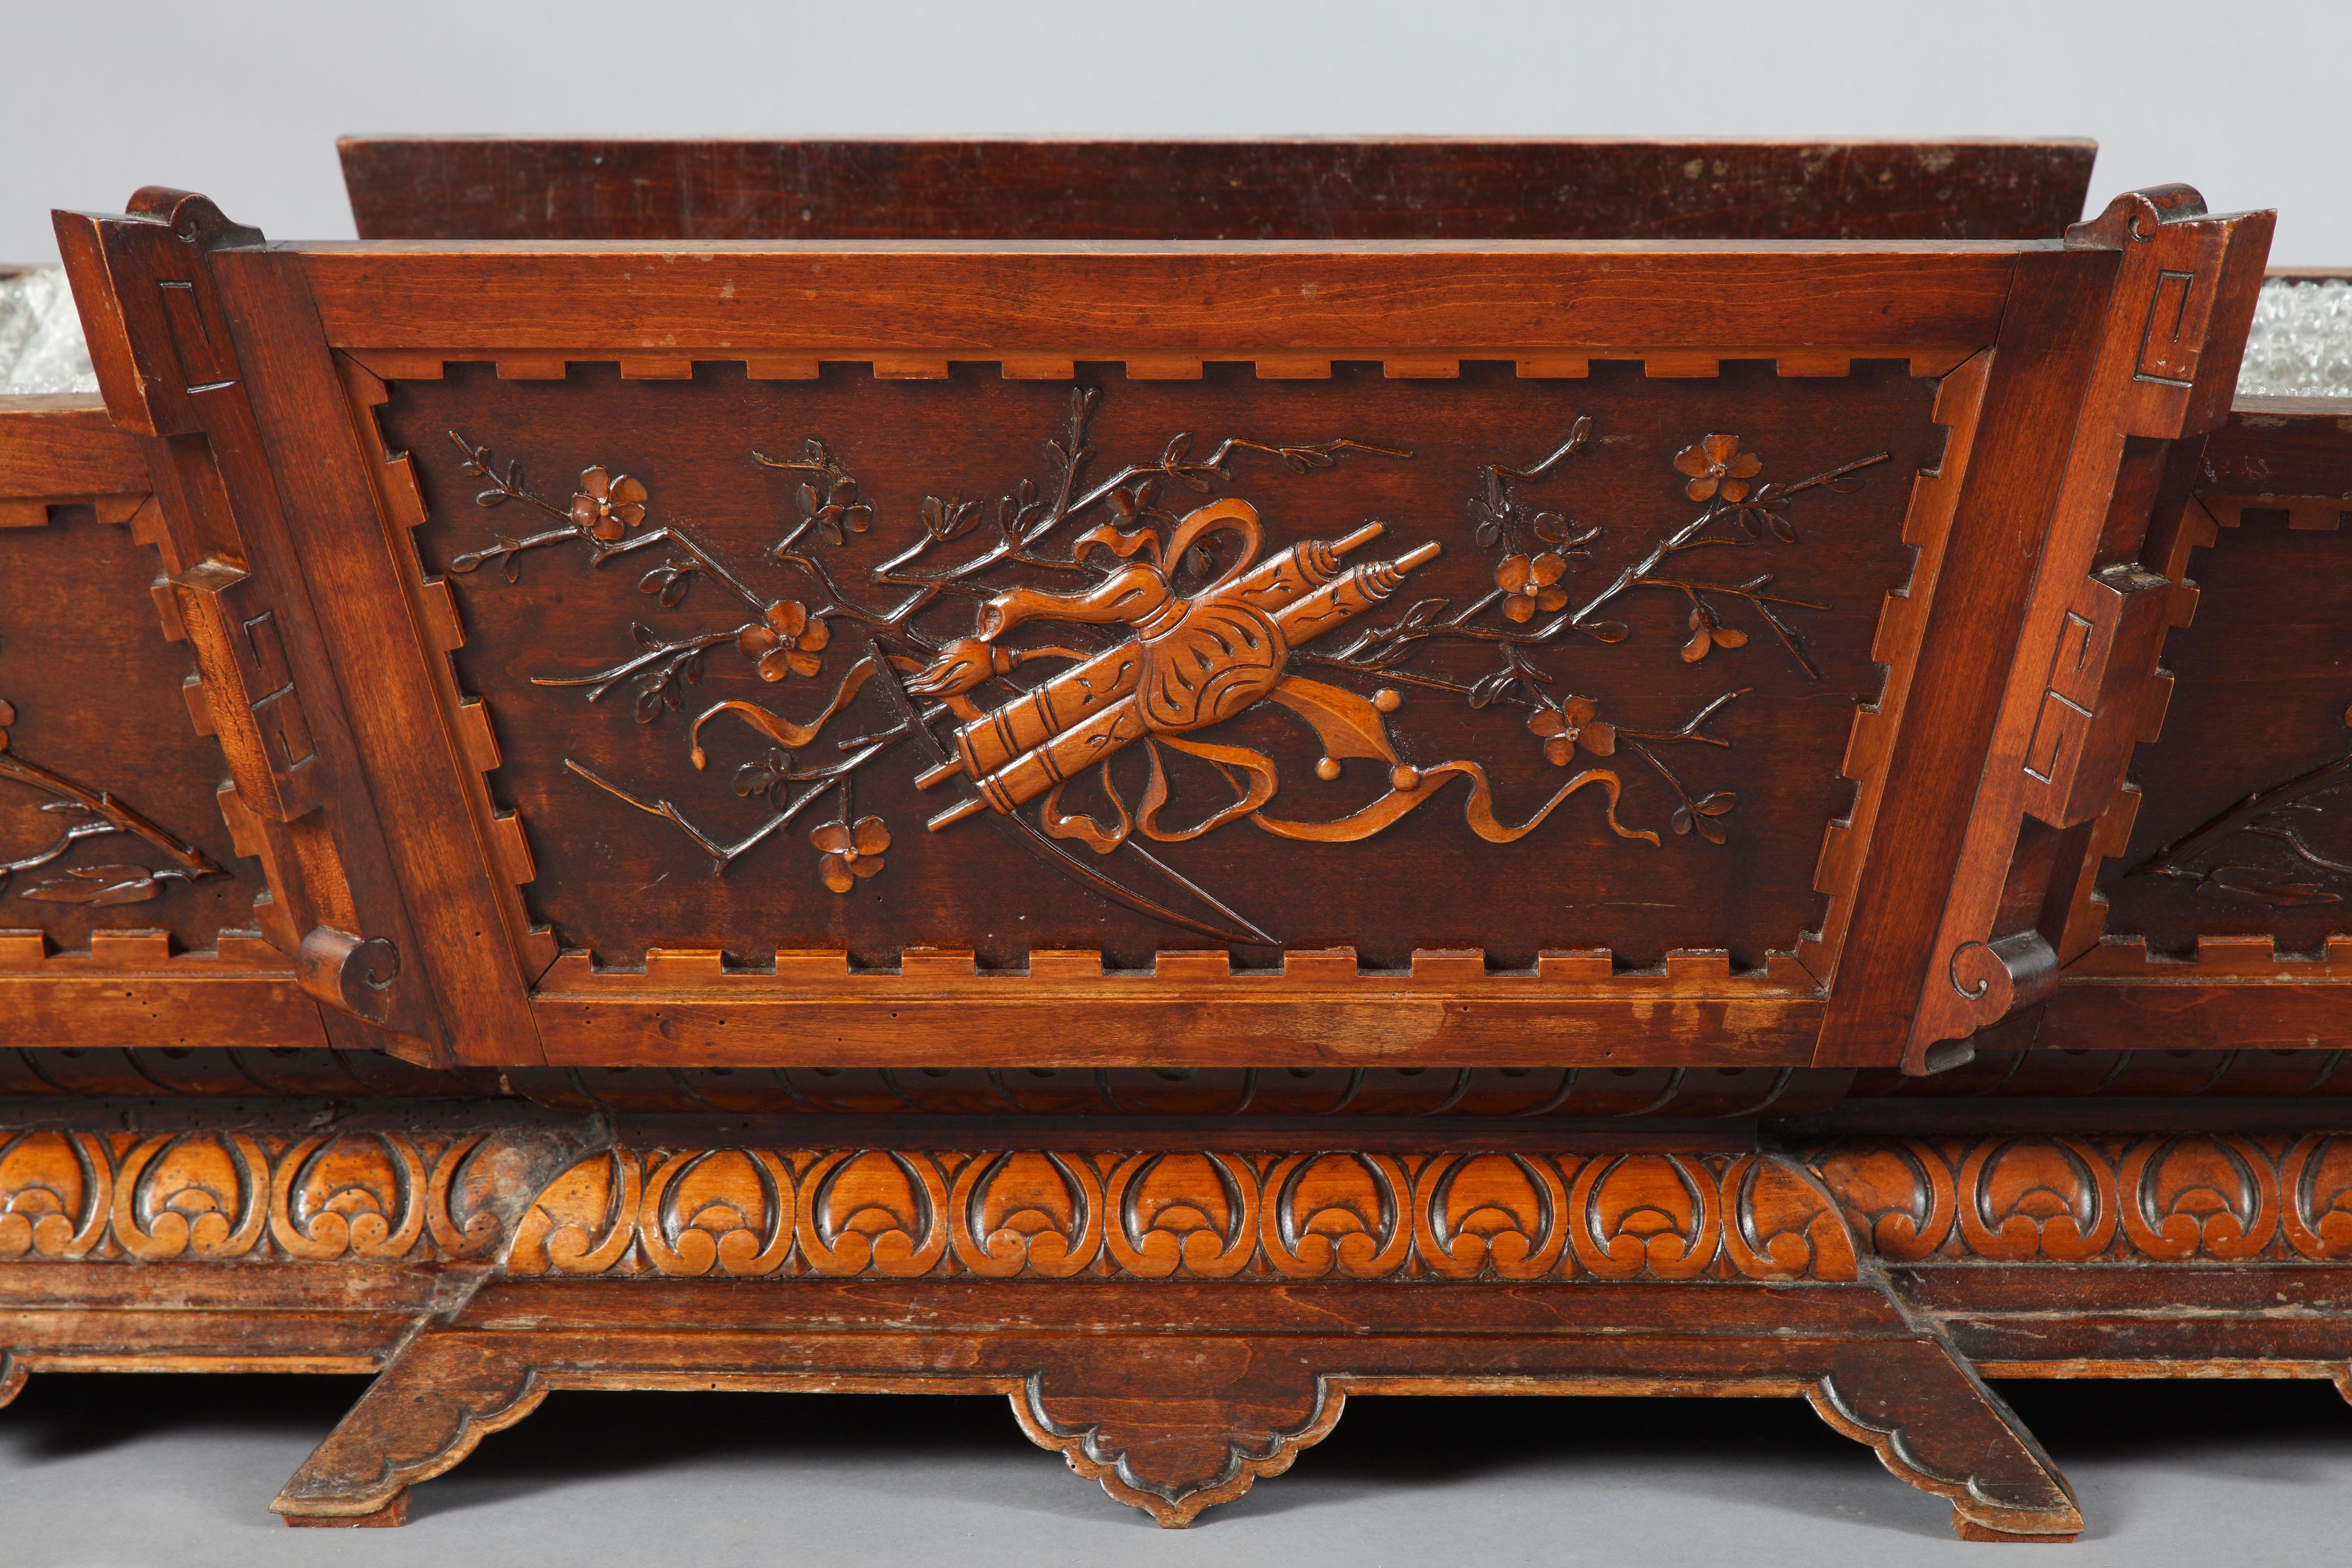 A large Japanese style boat-shaped jardiniere attributed to G. Viardot, made in carved wood, ornated with panels decorated with Japanese blossoming cherry tree branches and a trophy of musical instruments.

Gabriel Viardot career began as a wood